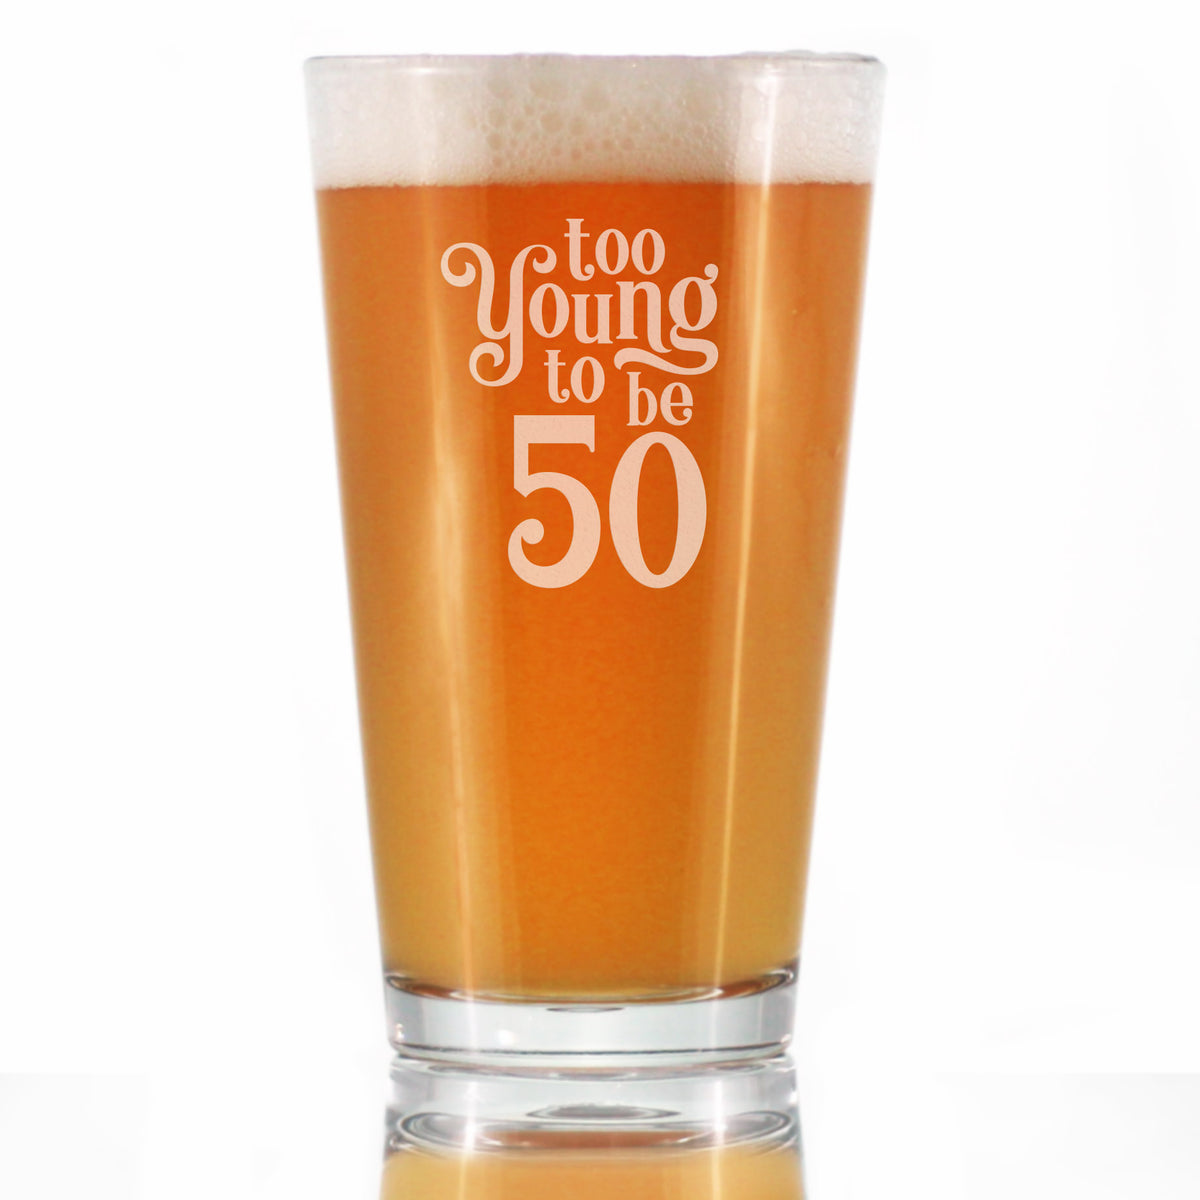 Too Young to Be 50 - Funny 16 oz Pint Glass for Beer - 50th Birthday Gifts for Men or Women Turning 50 - Bday Party Decor